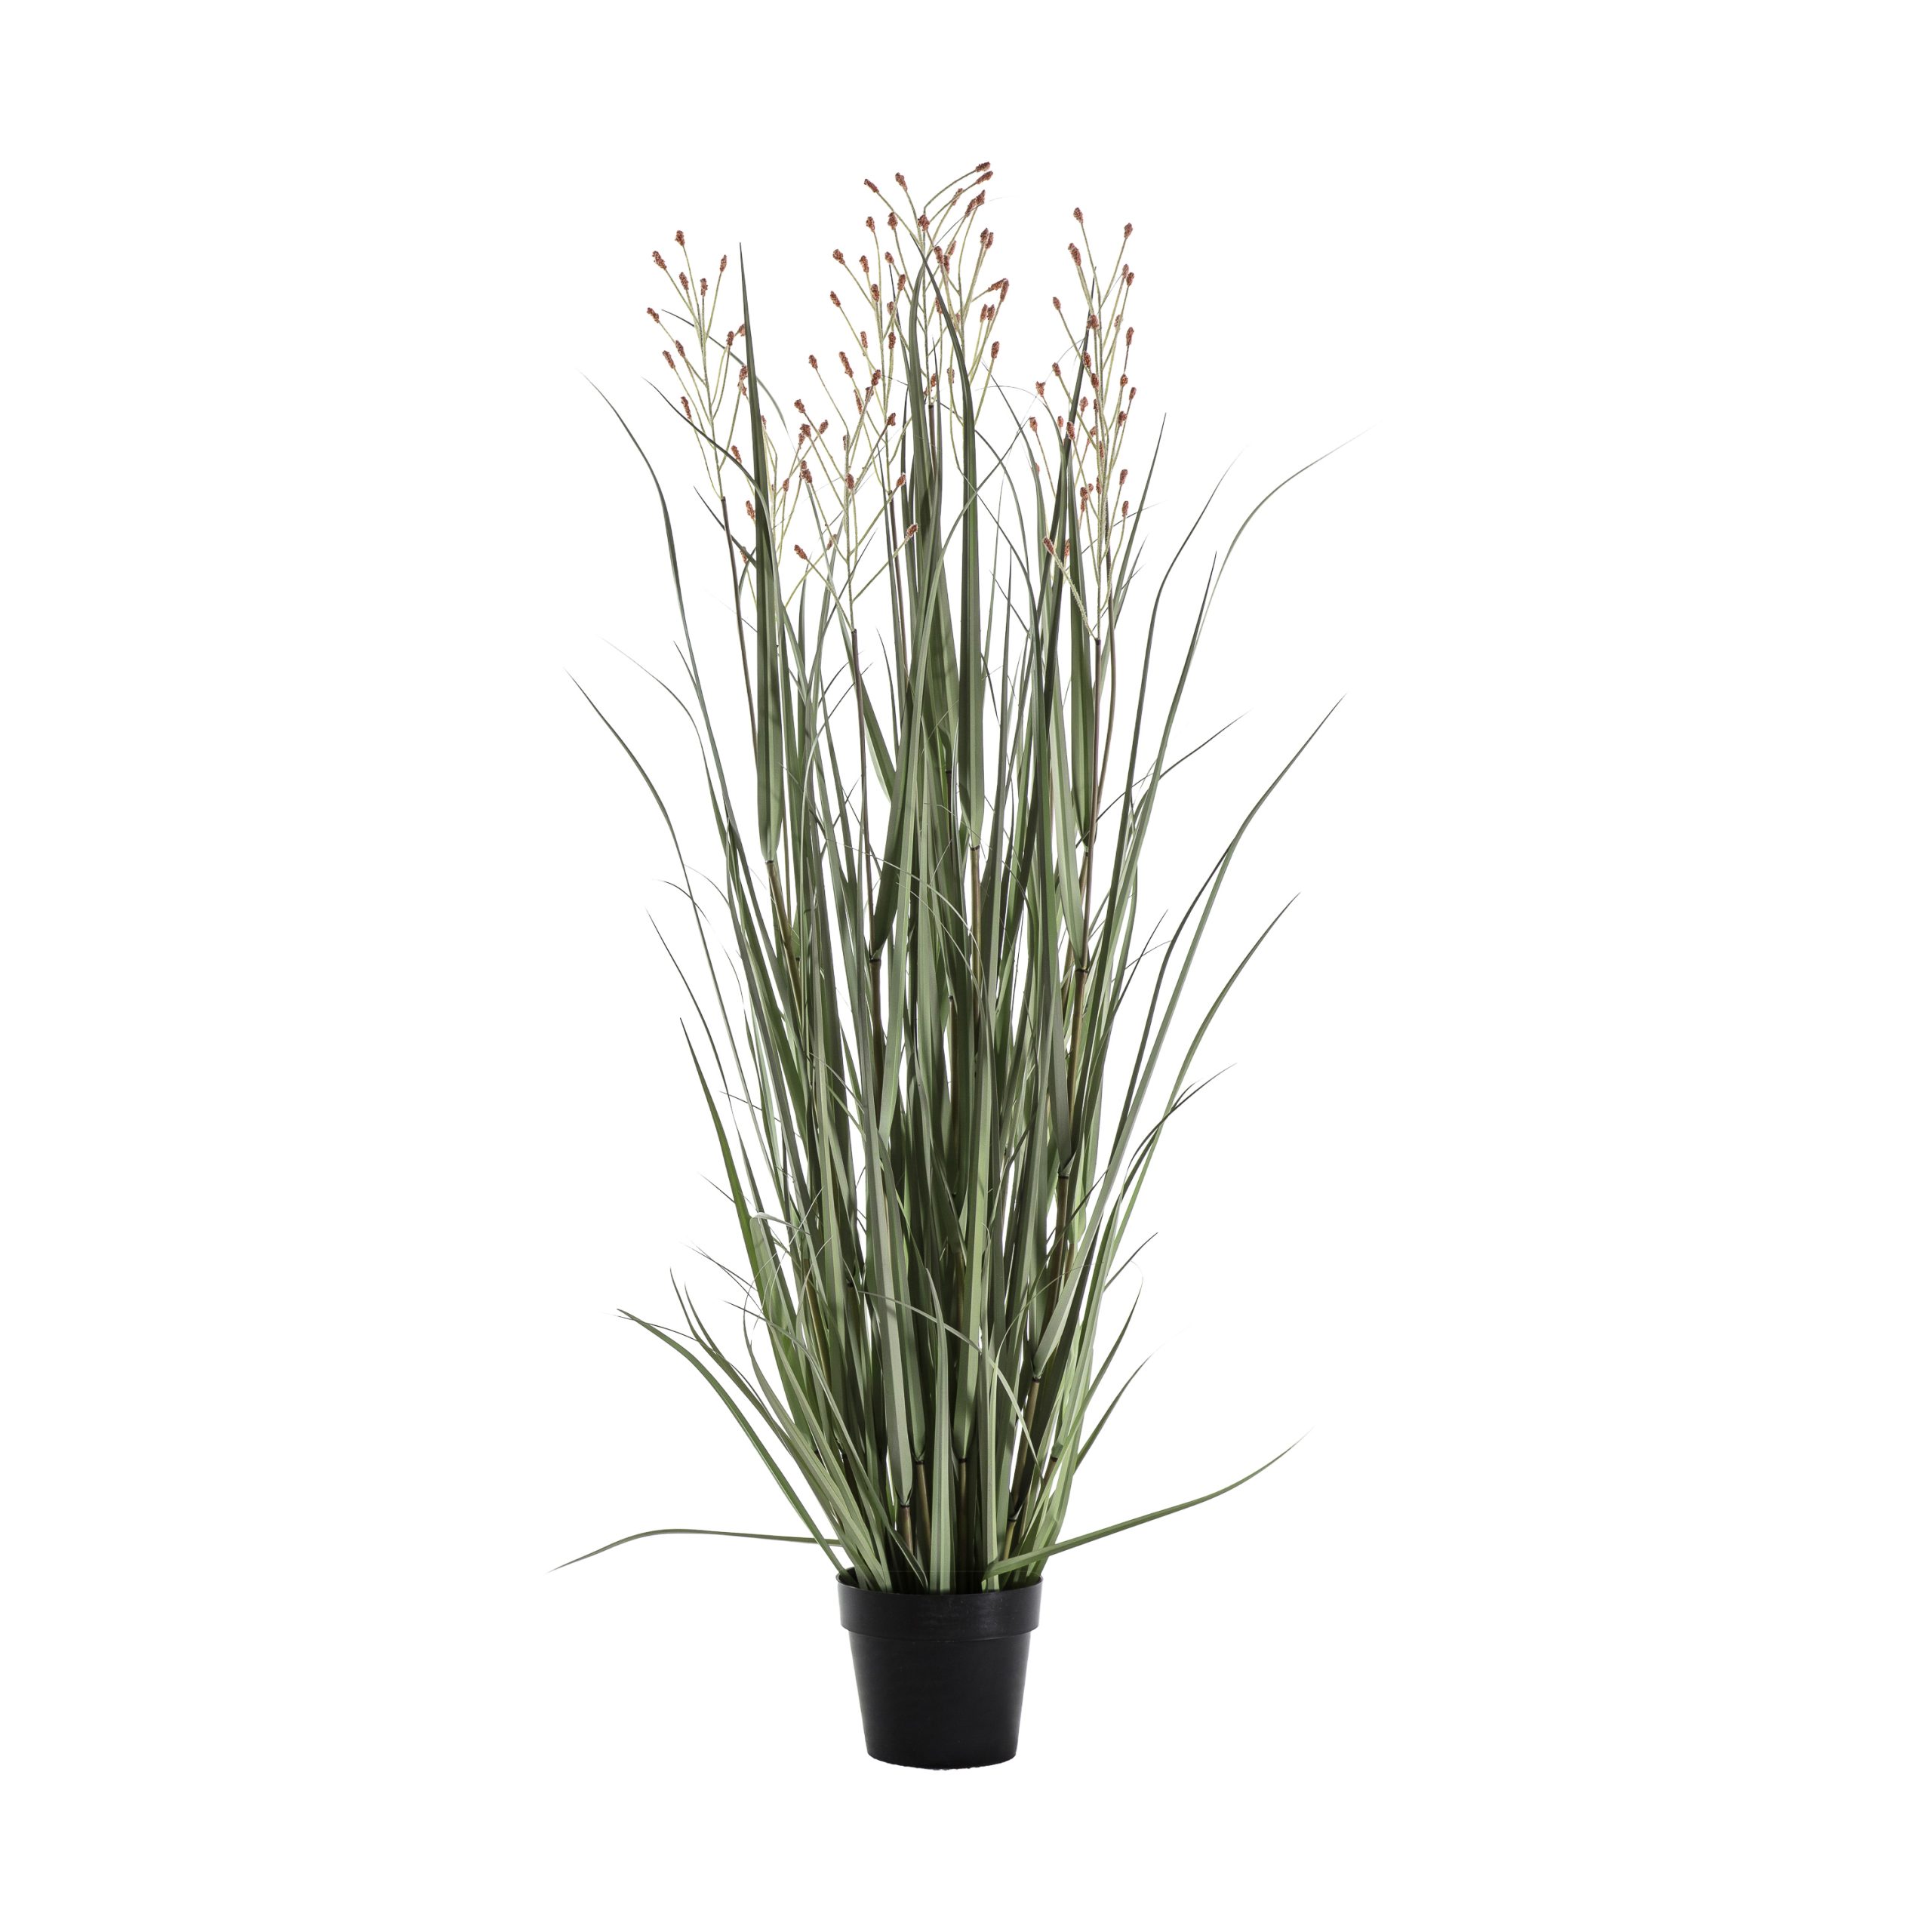 Gallery Direct Potted Grass w/7 Heads Green/Russet